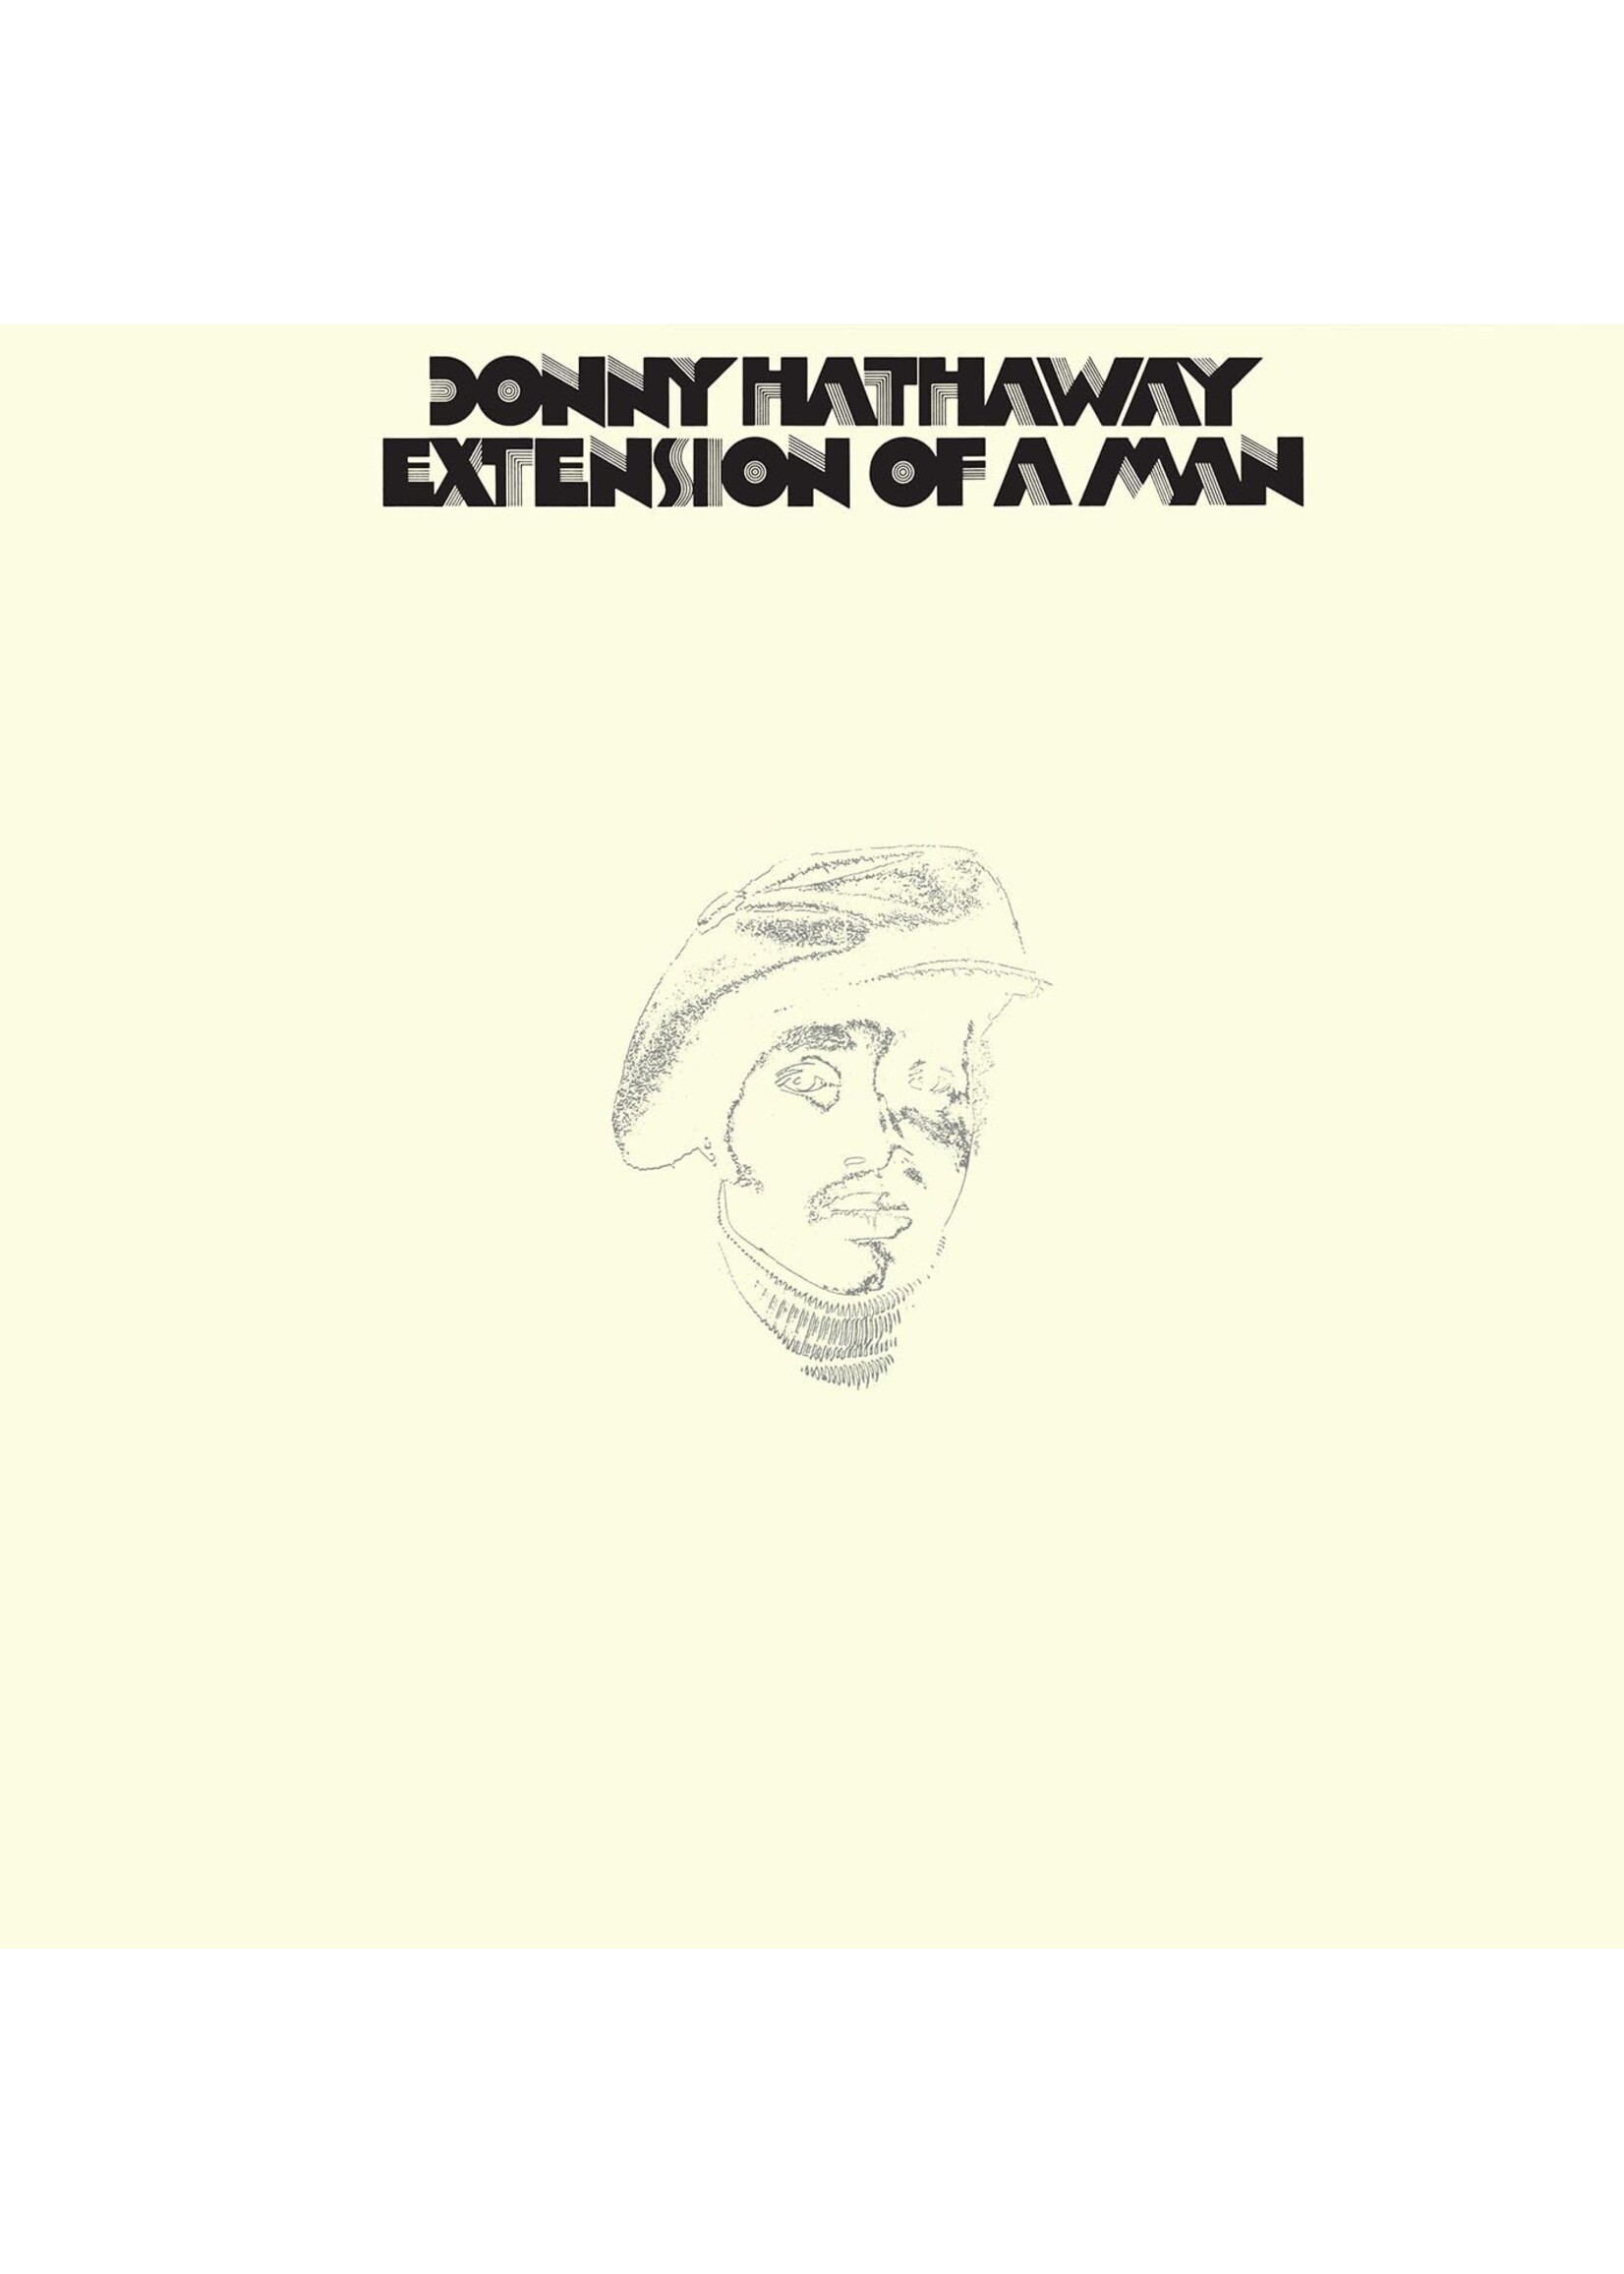 Donny Hathaway - Extensions of a Man